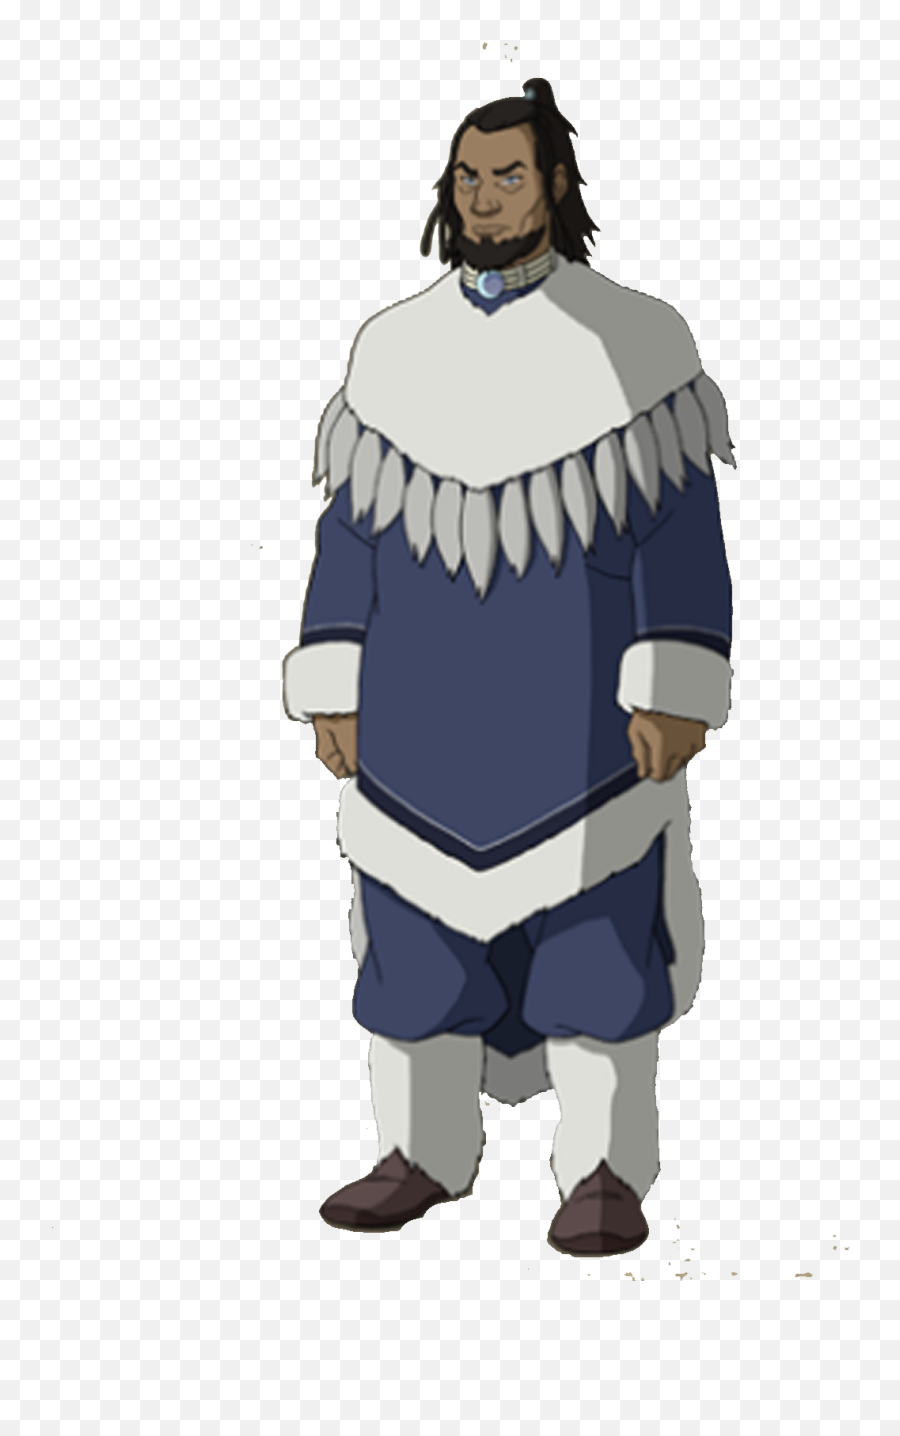 7 Known Avatars In Anime - Avatar The Last Airbender Kuruk Emoji,Avatar The Last Airbender When Anag Has To Face Himself With No Emotions